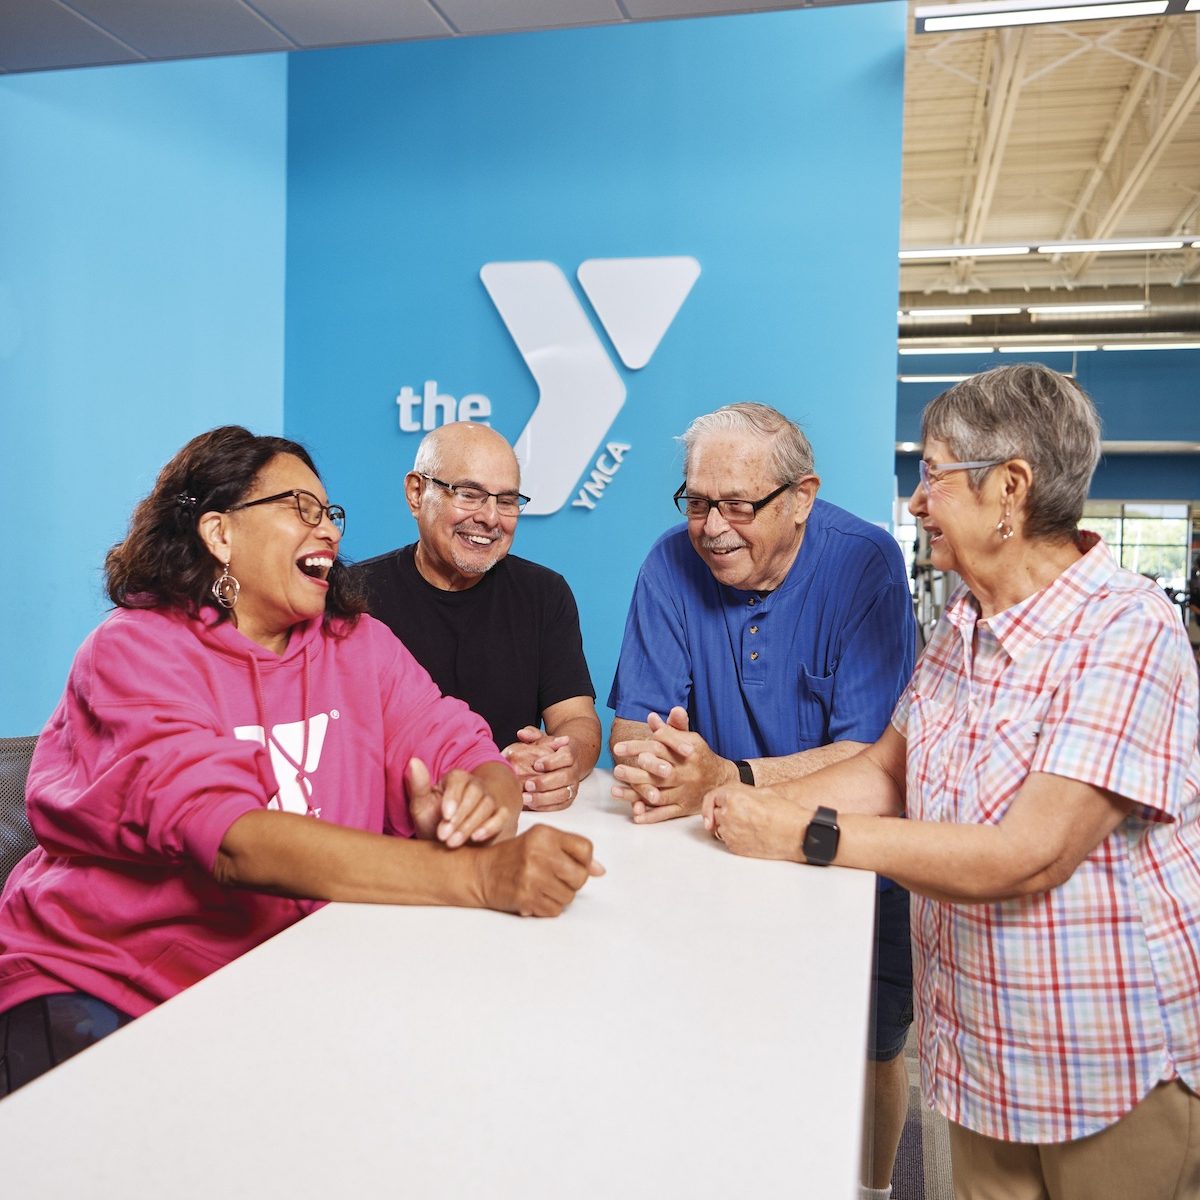 4 senior citizens standing around a white table with a blue wall with the "Y" symbol on it.